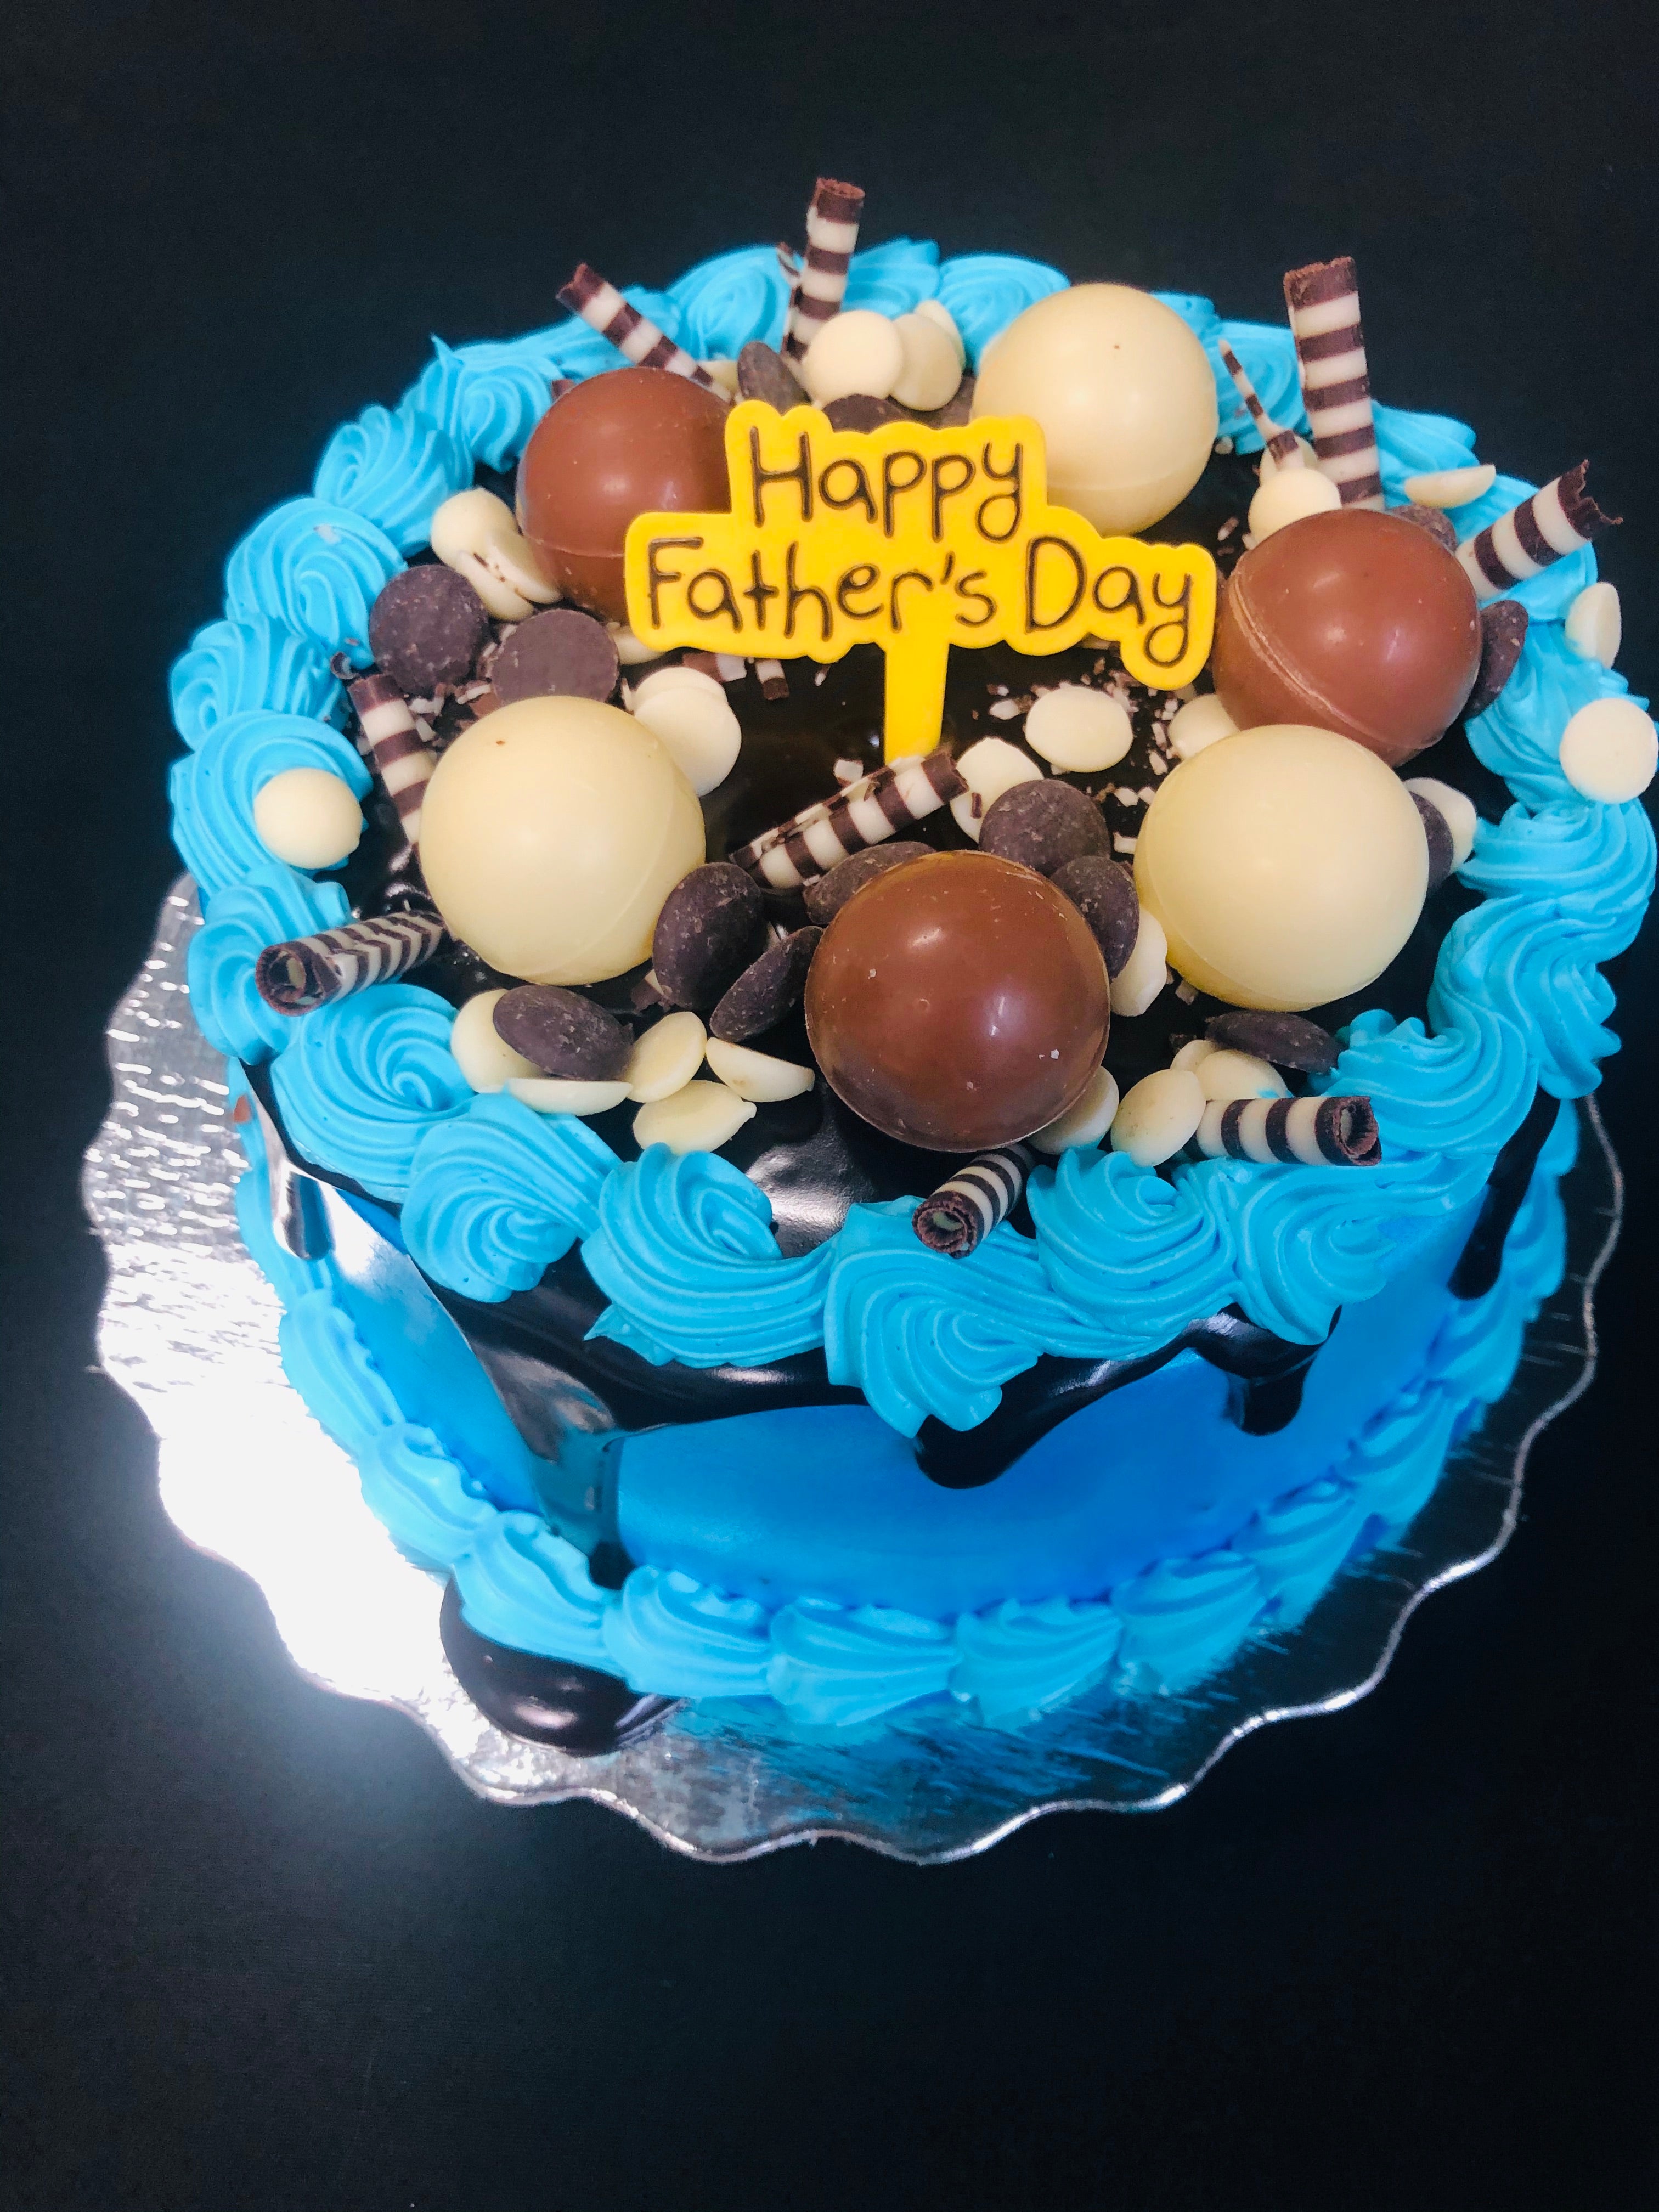 Treat Dad to a Sweet Father's Day Cake Pic!